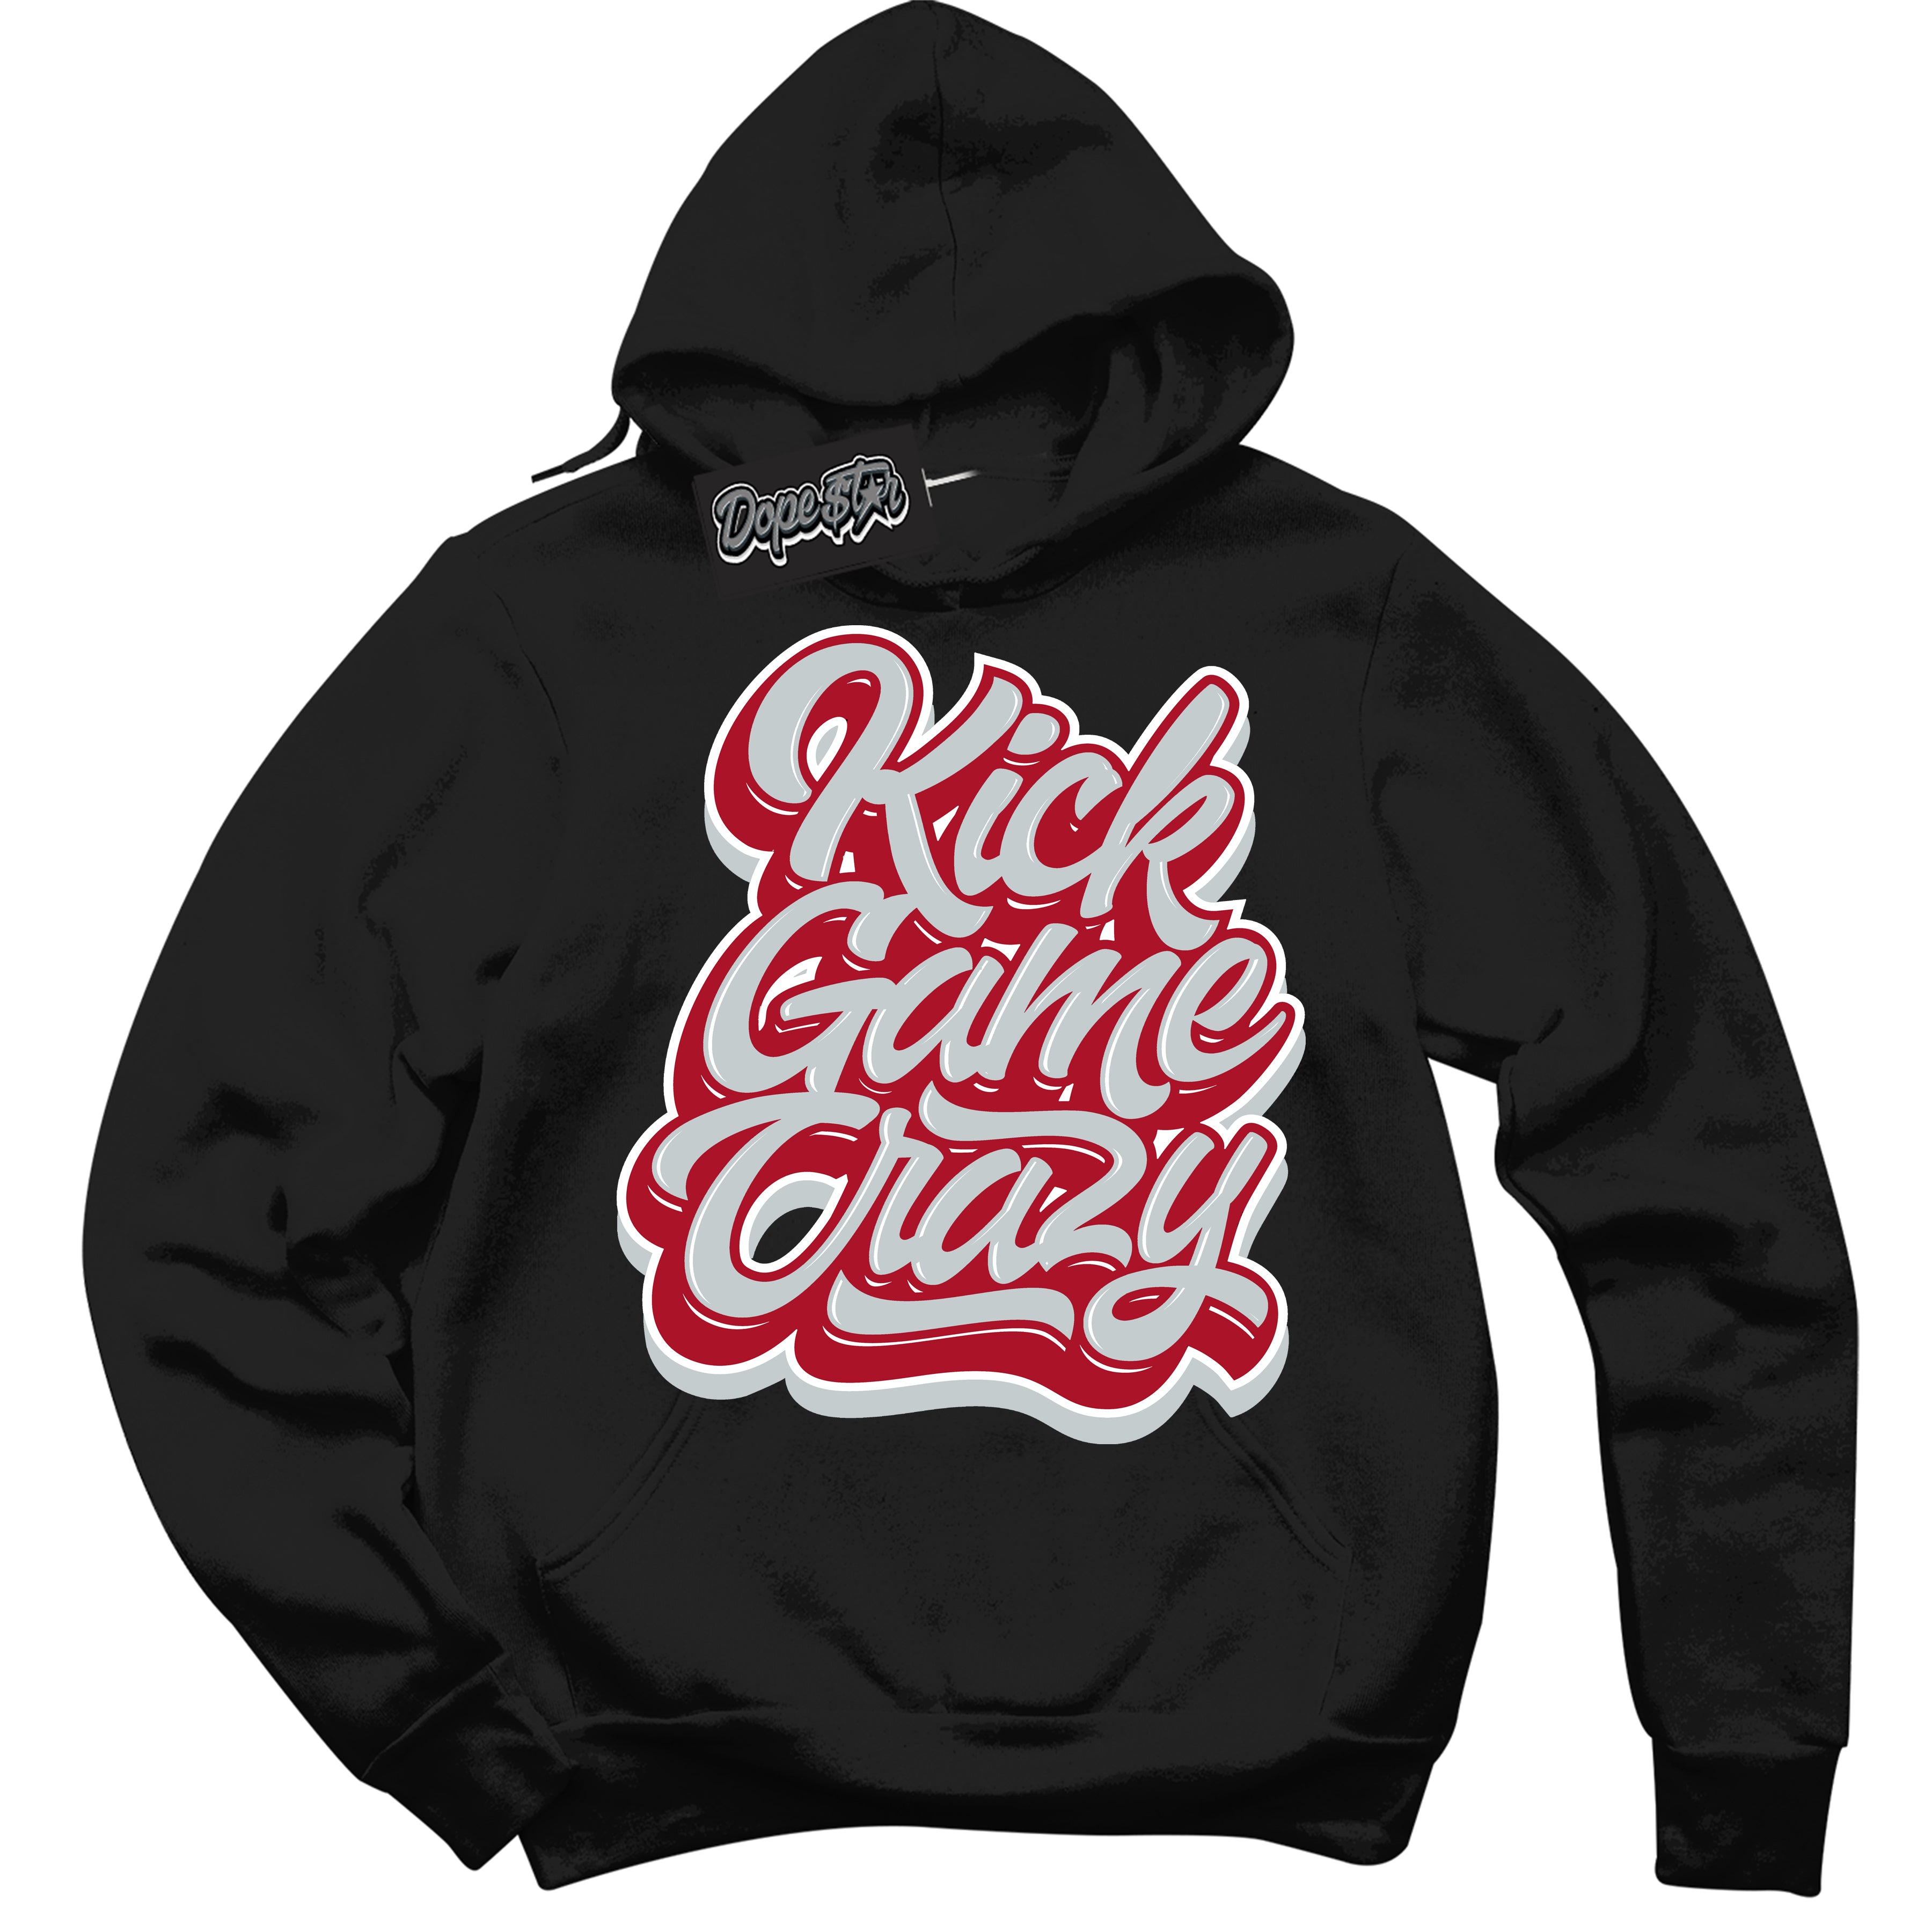 Cool Black Hoodie with “ Kick Game Crazy ”  design that Perfectly Matches  Reverse Ultraman Sneakers.